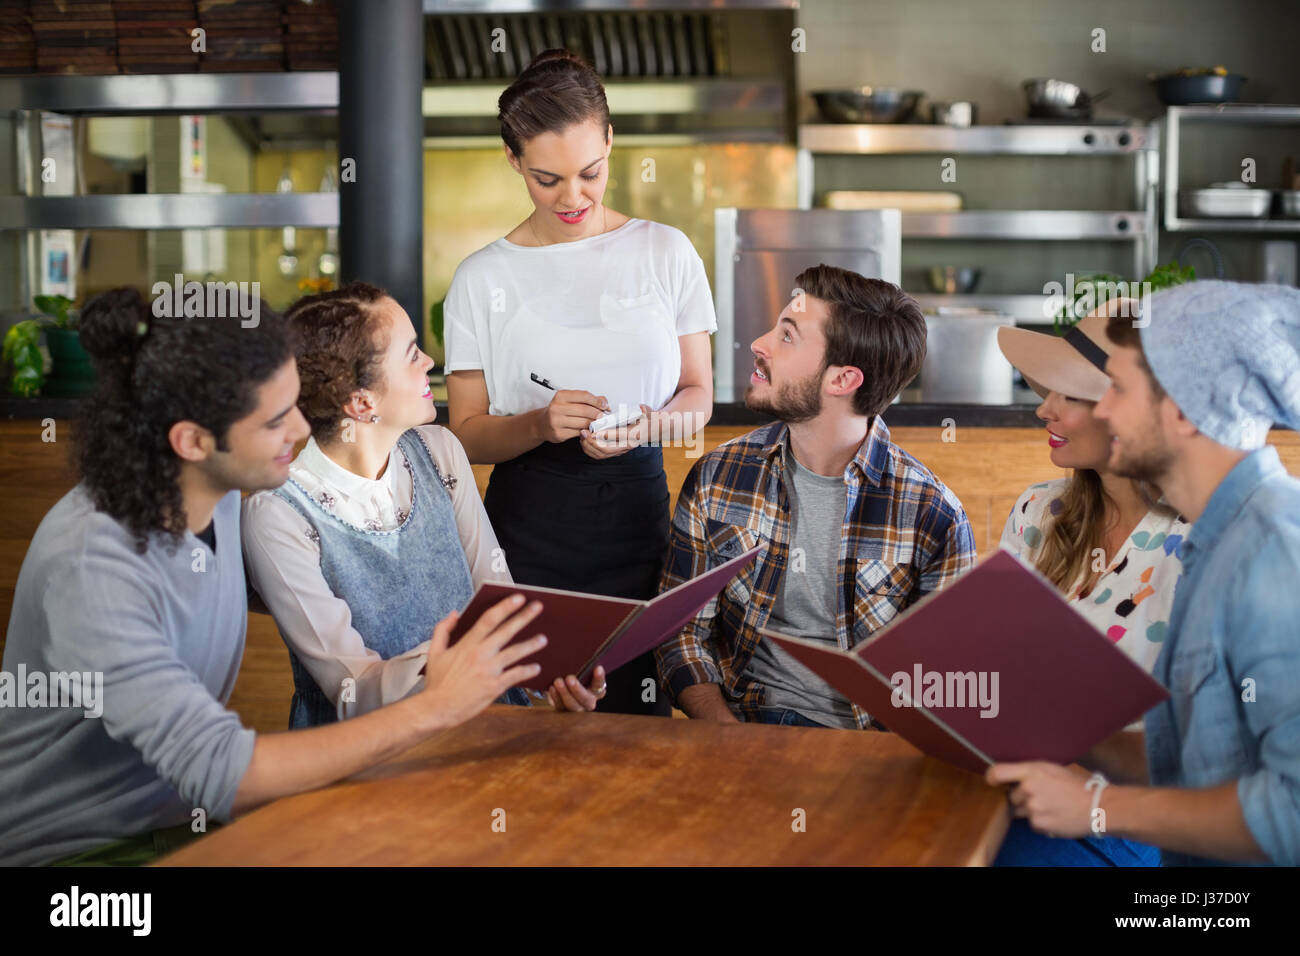 Customers looking at waitress taking down orders in restaurant Stock Photo